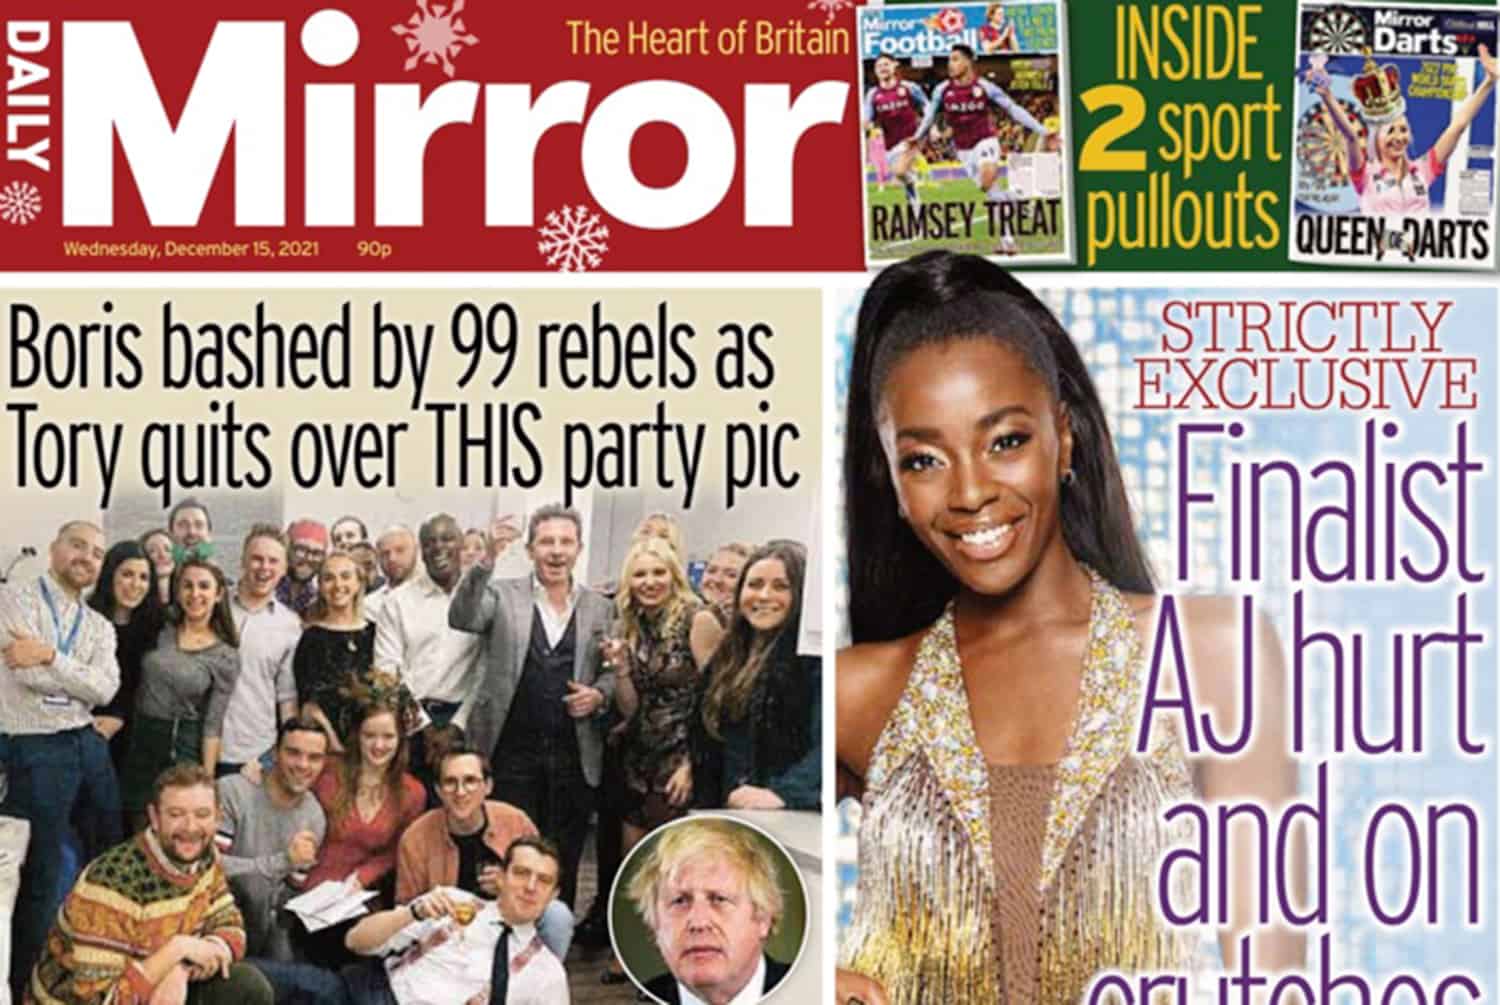 Lib Dems pay to promote Daily Mirror story to voters in North Shropshire